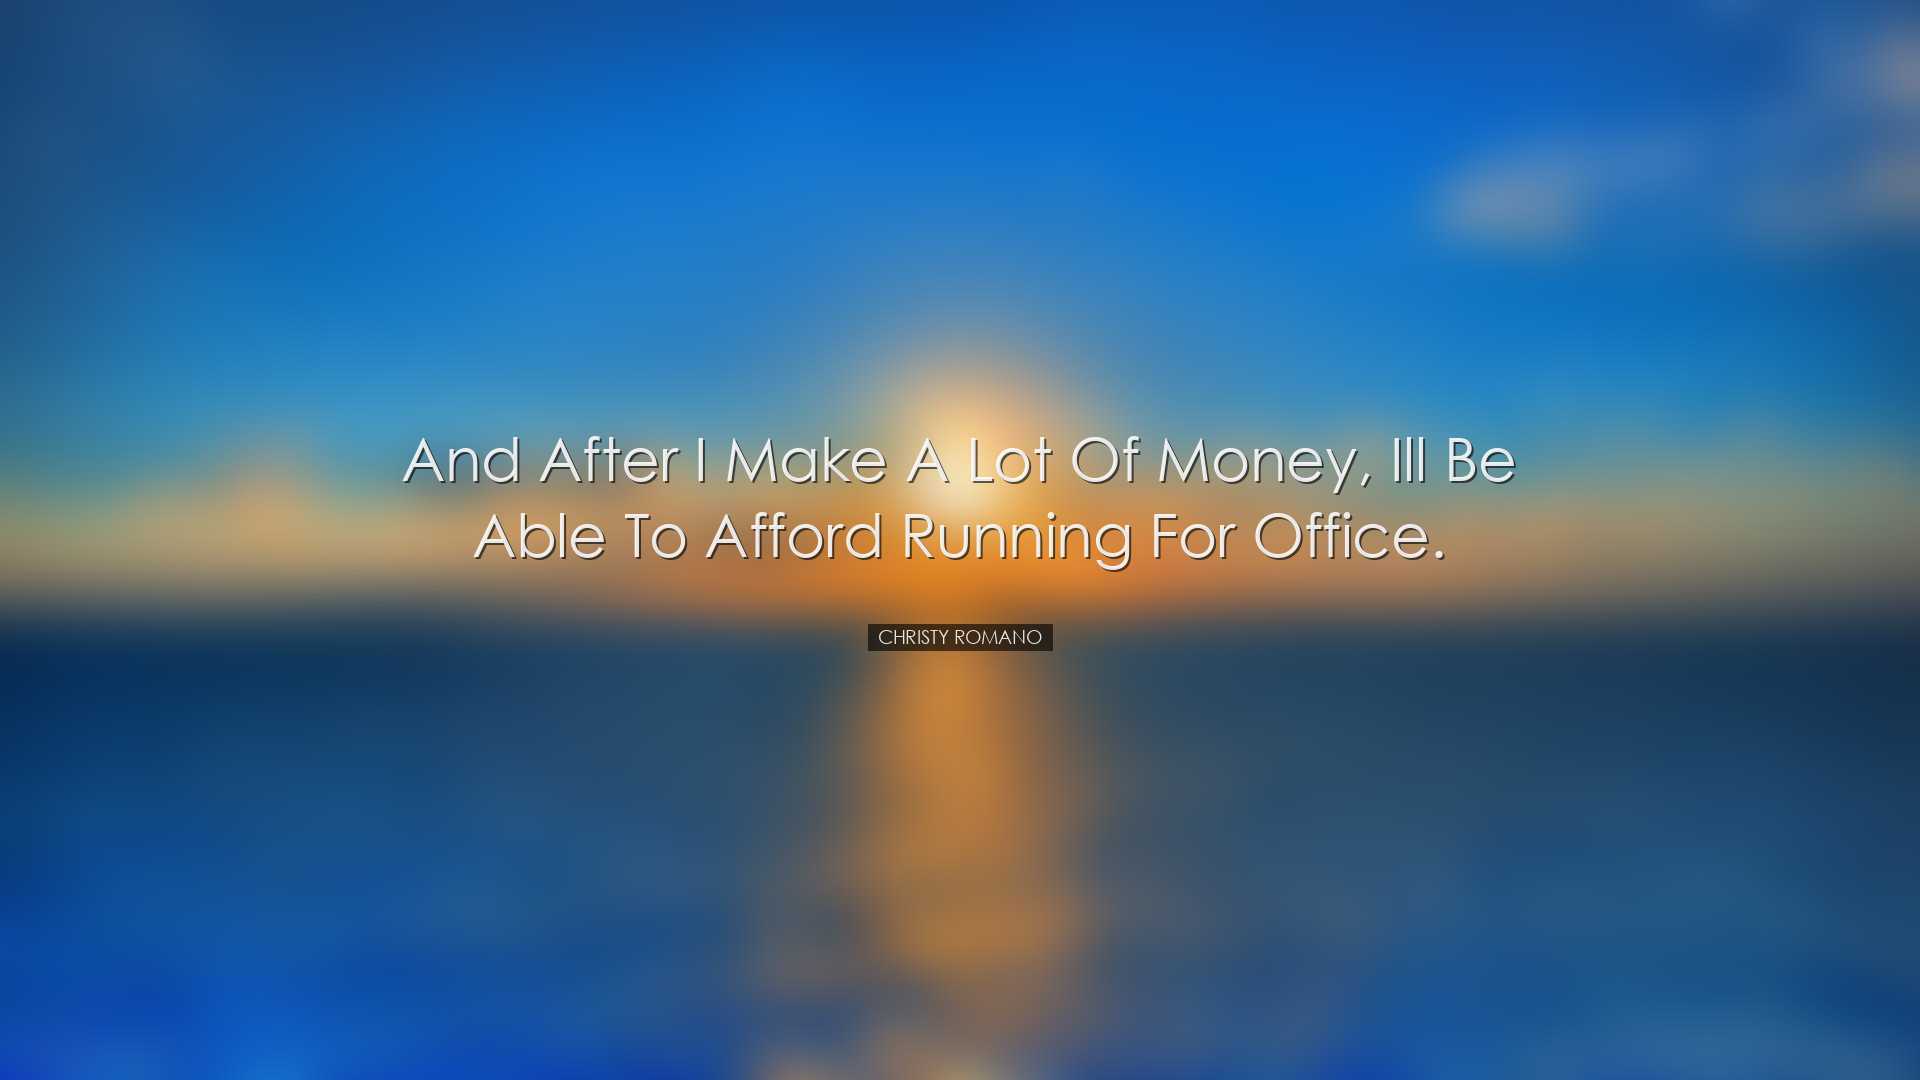 And after I make a lot of money, Ill be able to afford running for